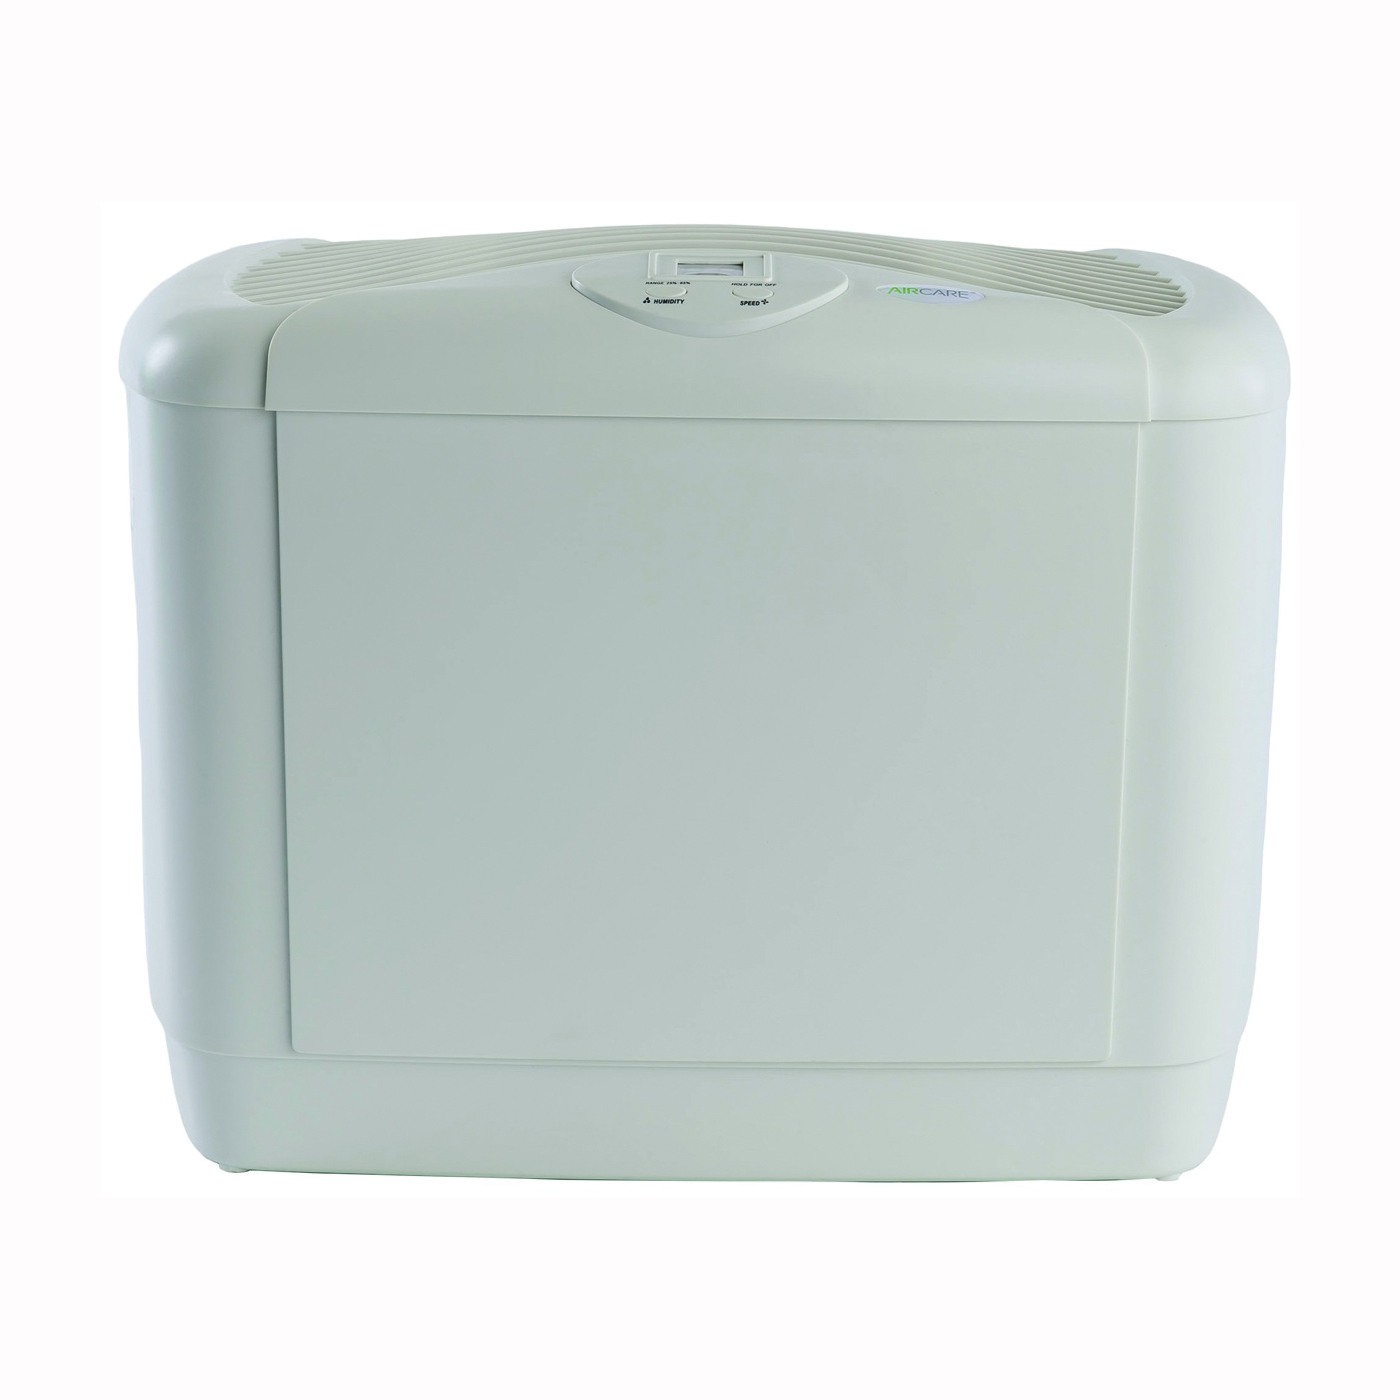 5D6 700 Console Humidifier, 120 V, 4-Speed, 1250 sq-ft Coverage Area, 3 gal Tank, Digital Control, White